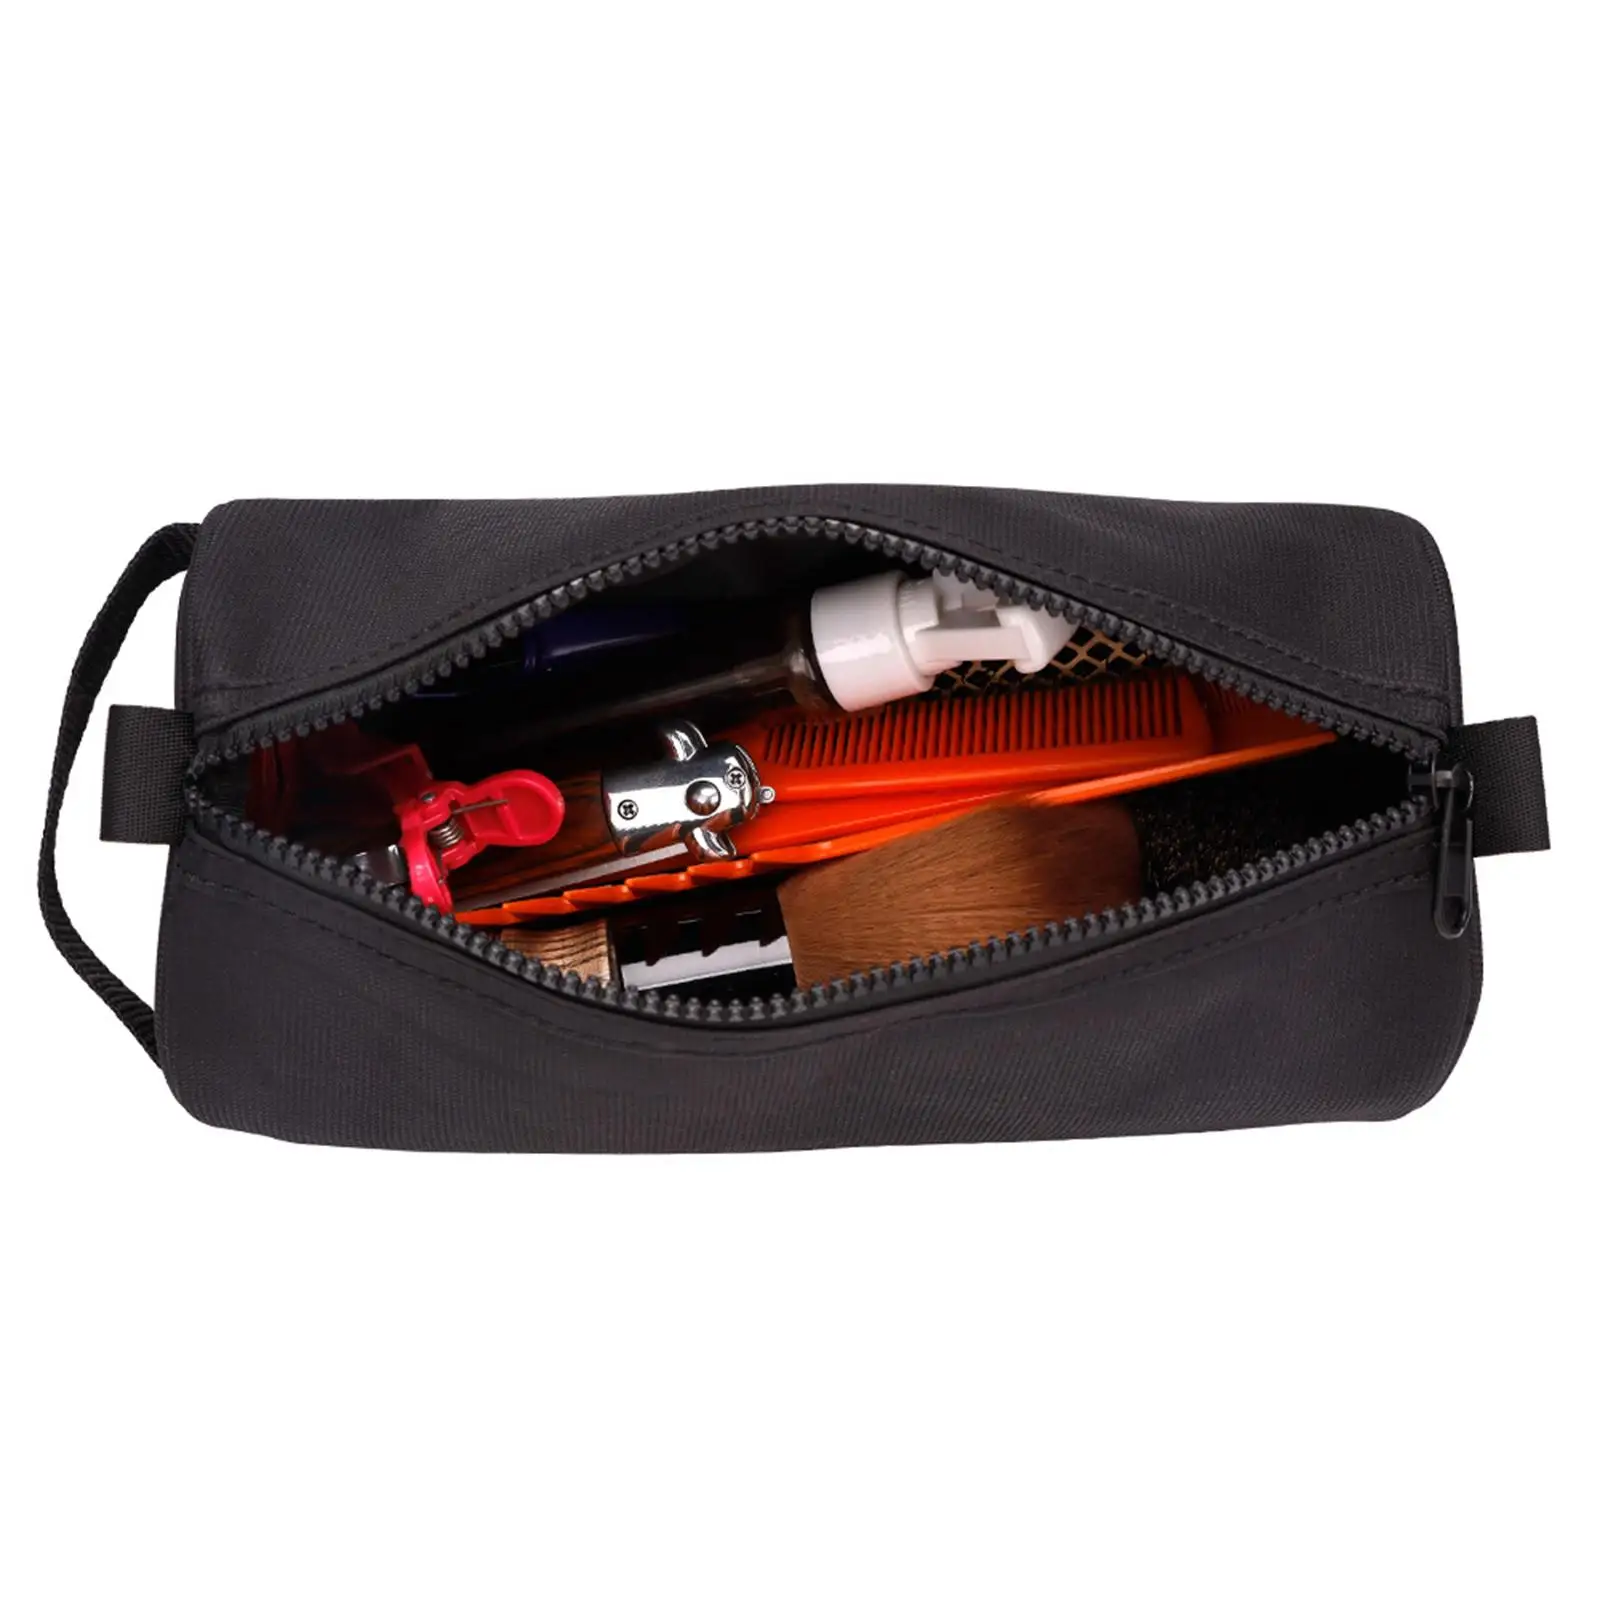 Hairdressing Handbag Hair Cutting Tools Carrying Bag for Hairdresser Home Salon Makeup Cosmetic Travel Carrying Bag